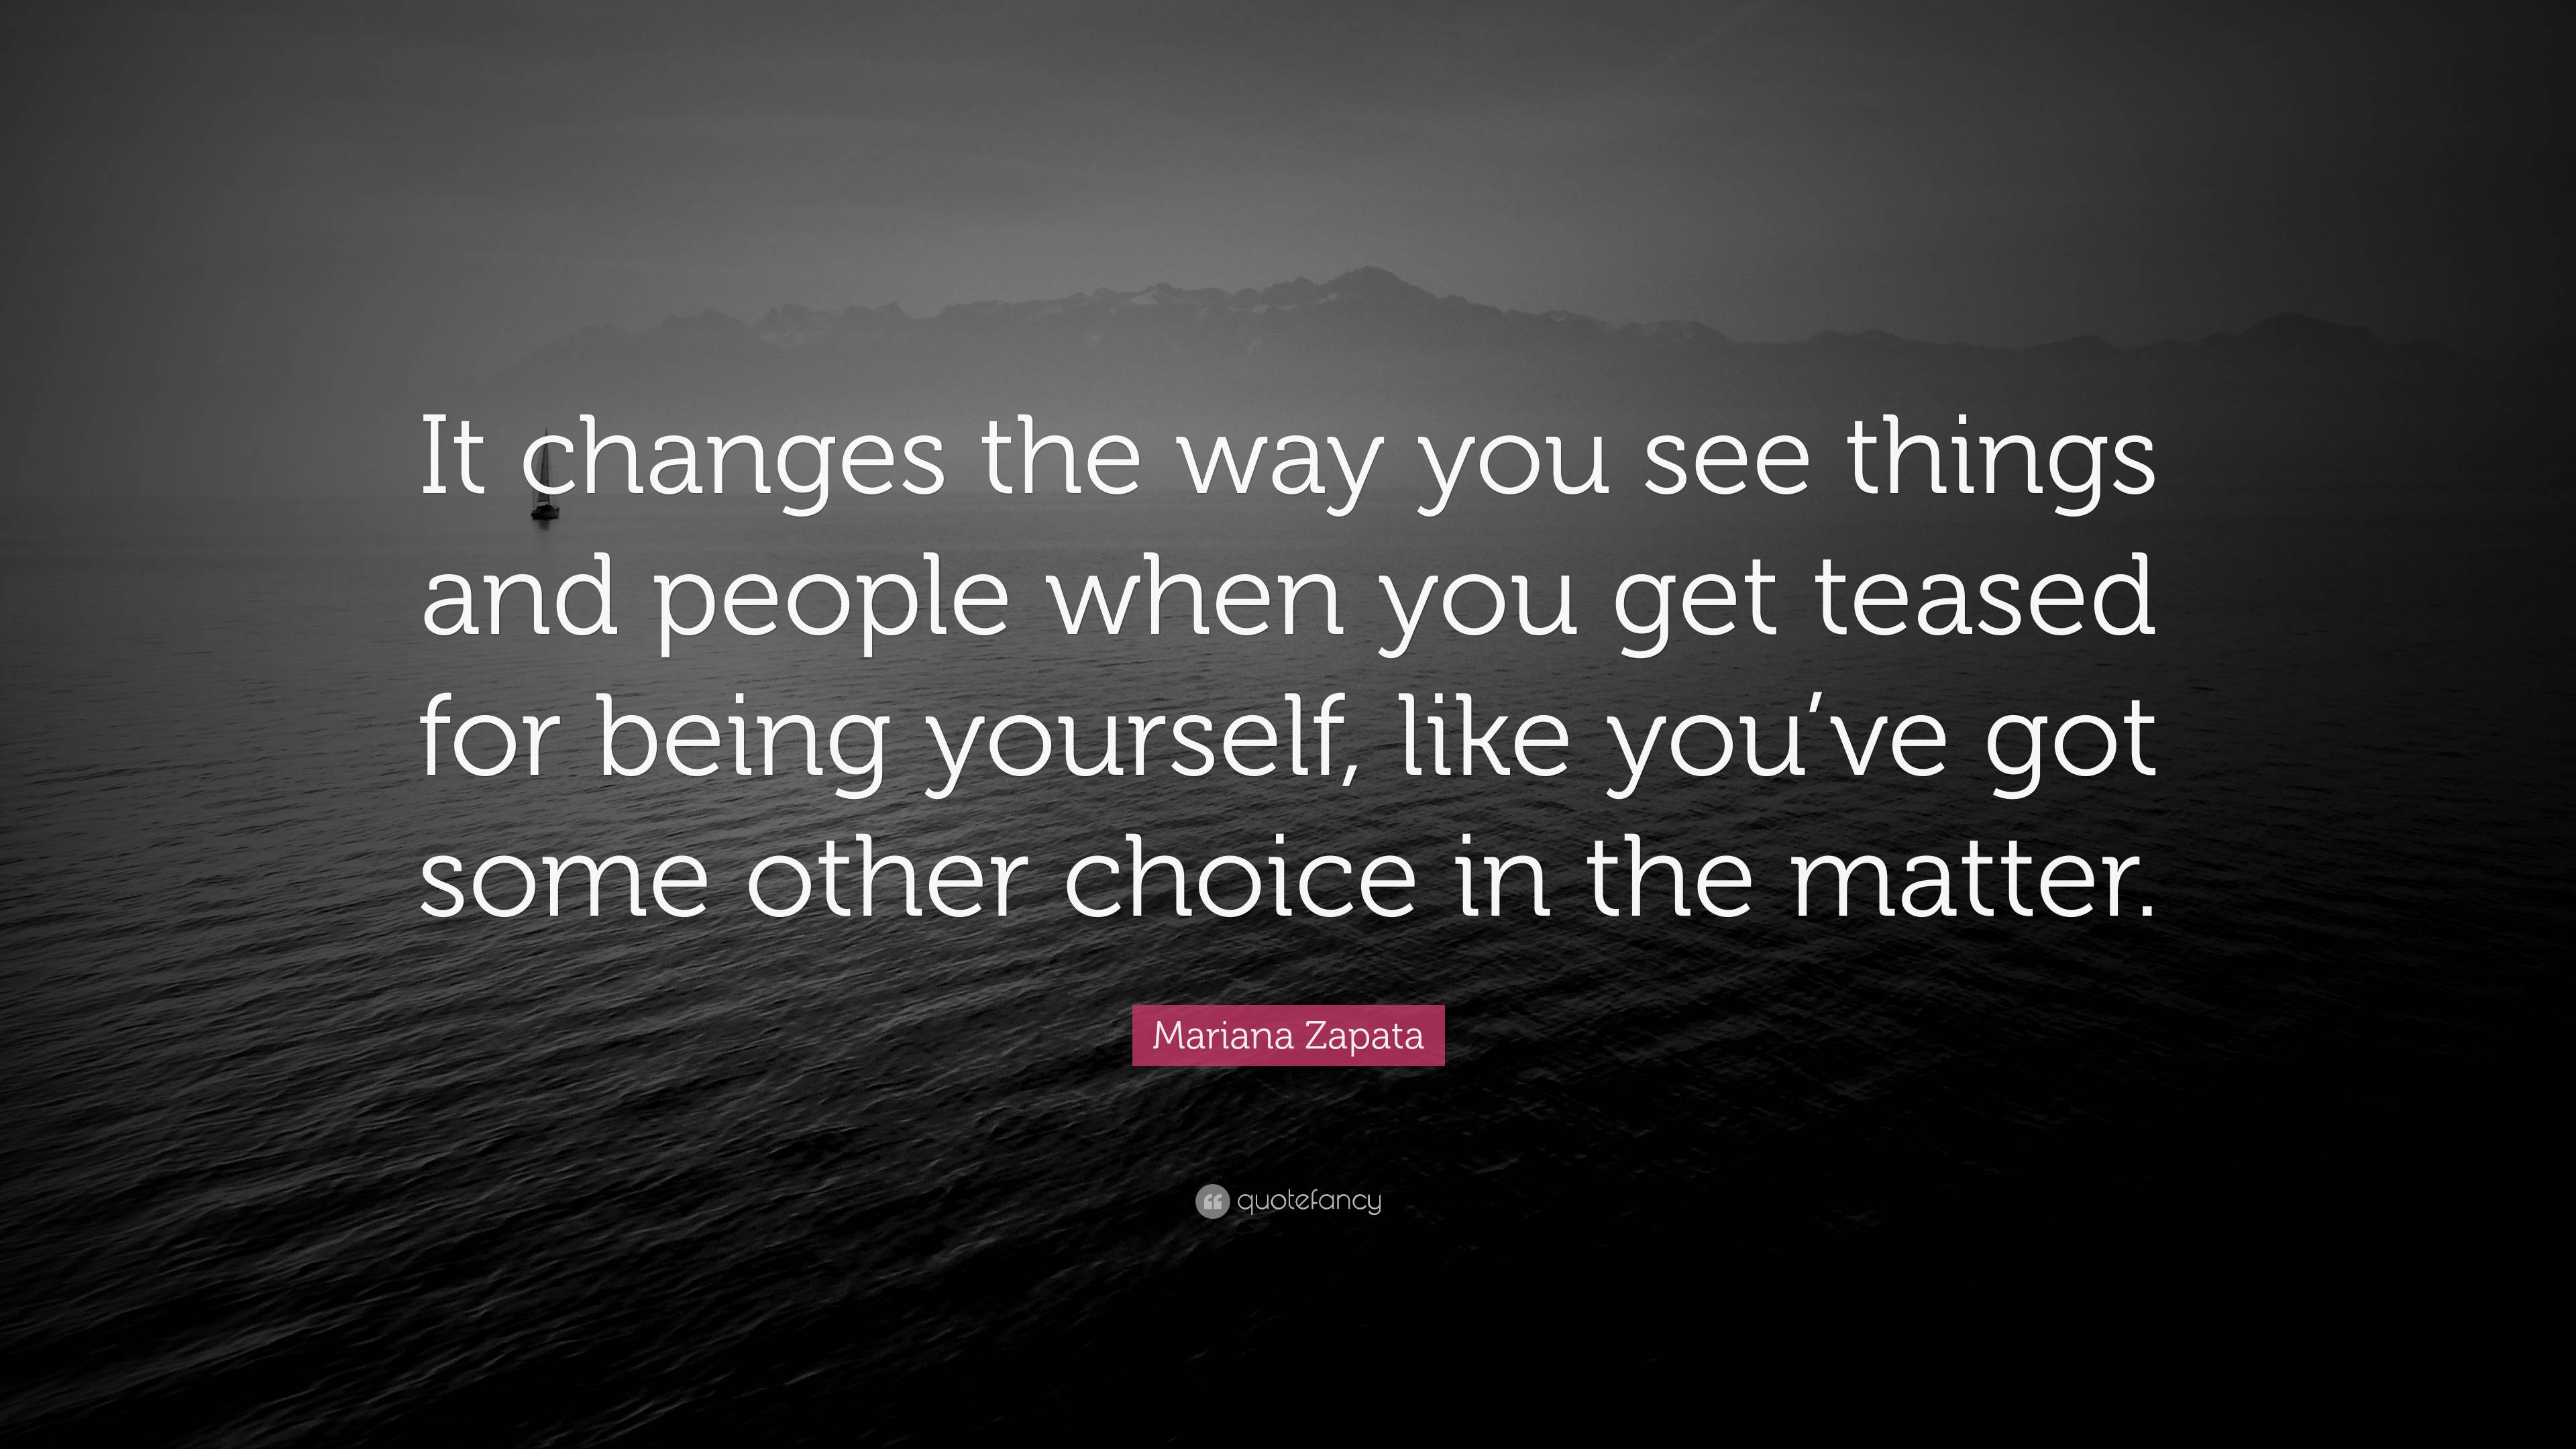 Mariana Zapata Quote: “It changes the way you see things and people ...